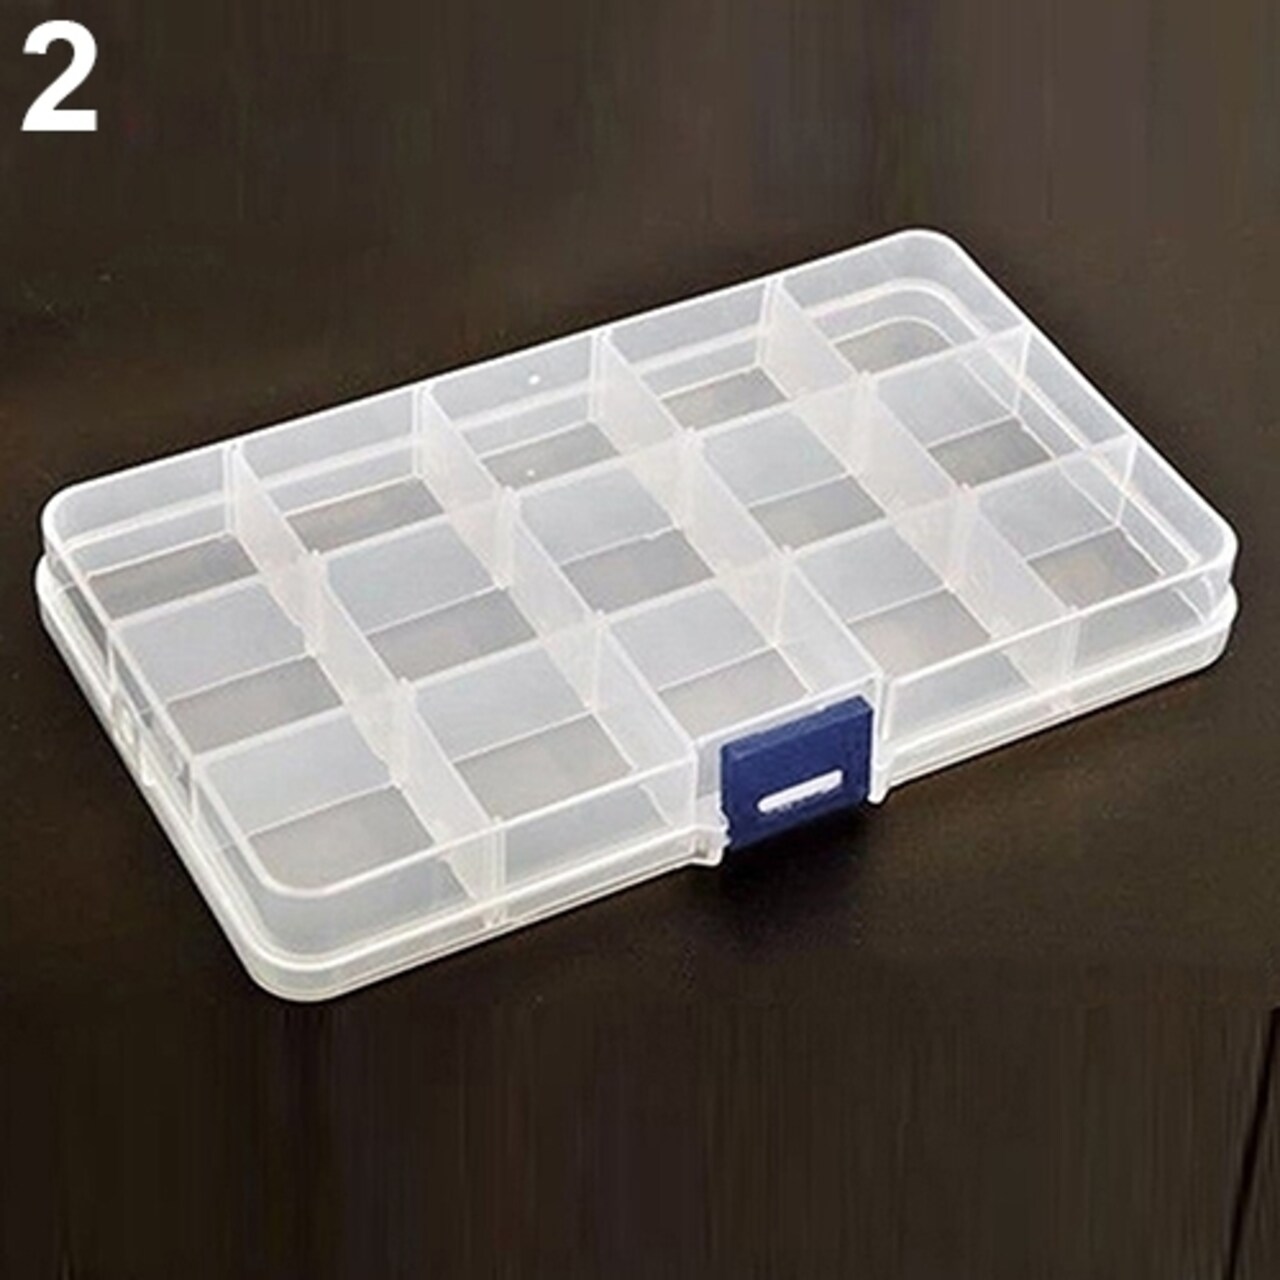 Storage Boxes Plastic Storage Container With Lids 10/15/24 Grids